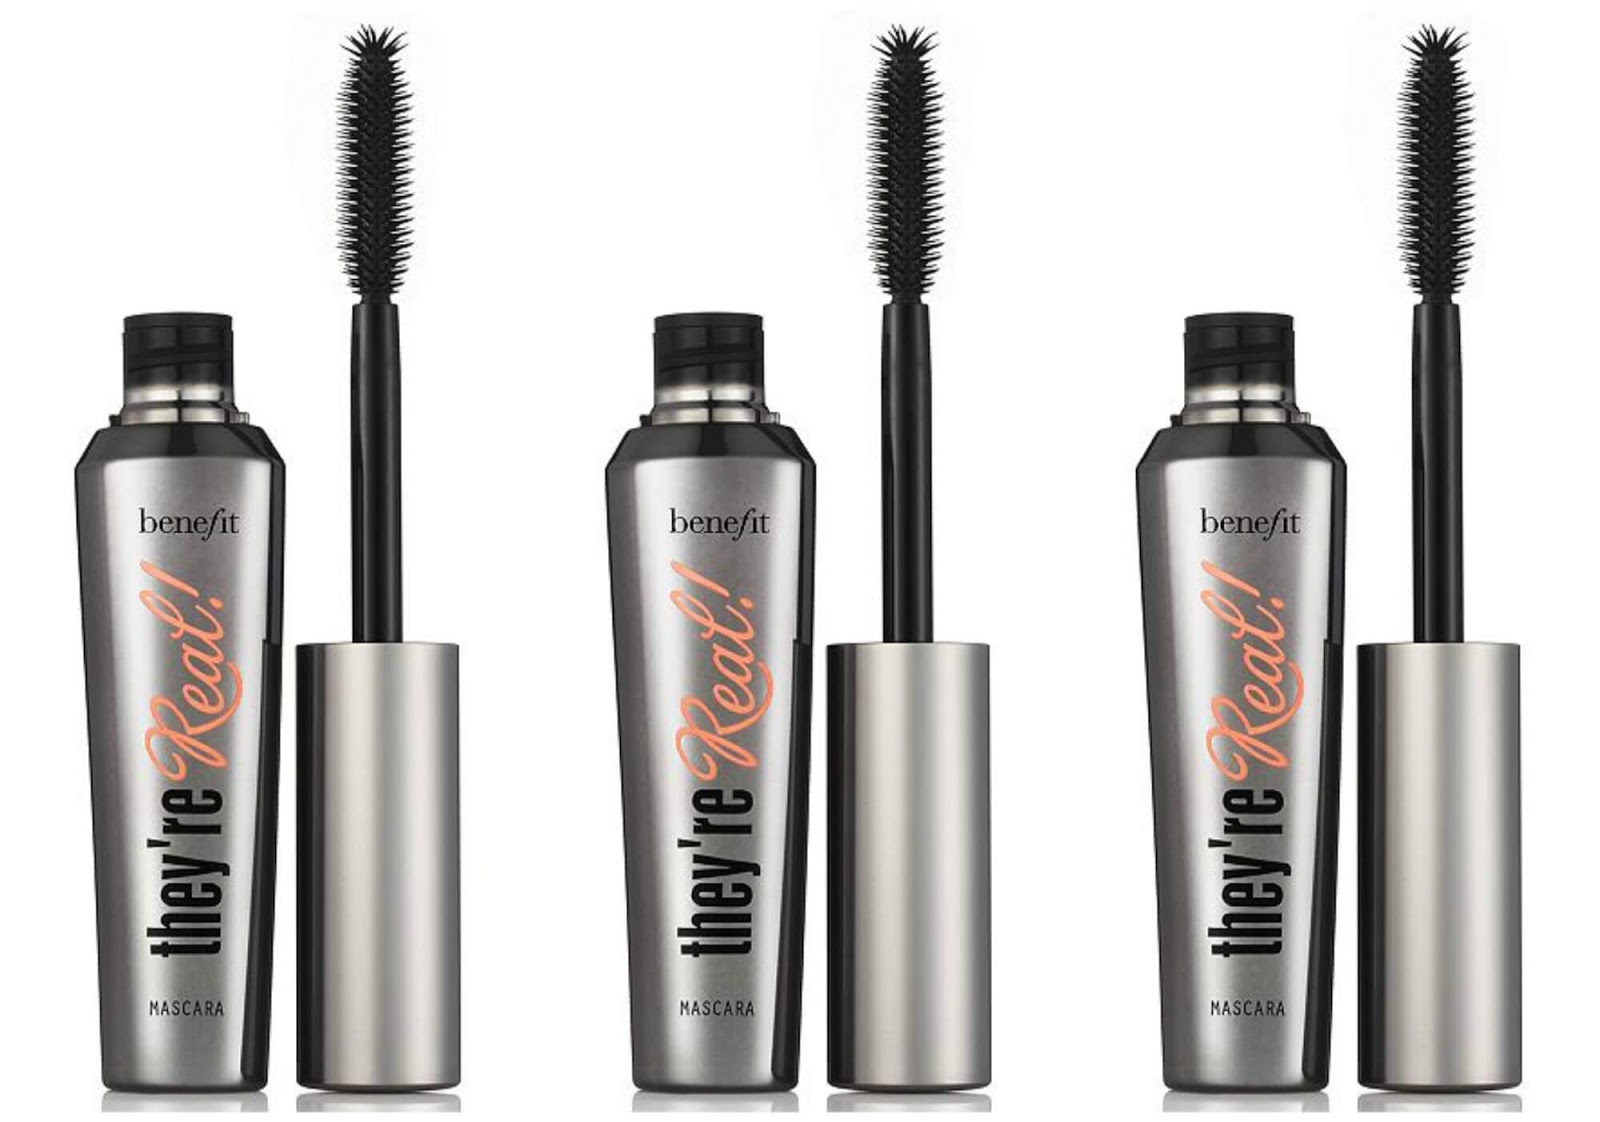 Sephora Daily Wow: 50% Off Benefit Cosmetics They're Real! Mascara!